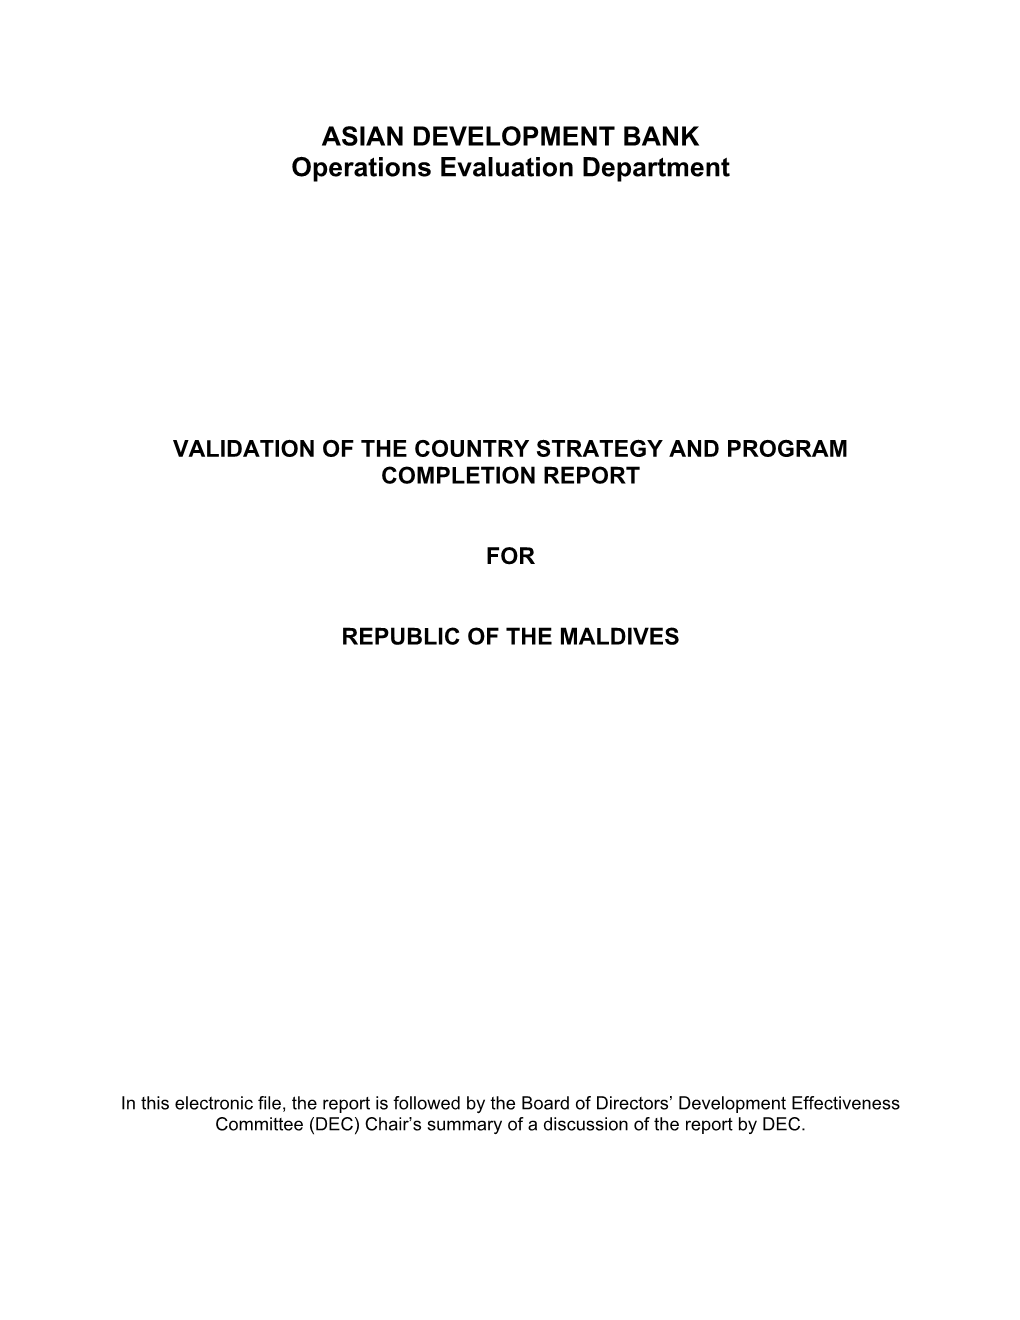 Validation Report on the Country Strategy and Program Completion Report for the Maldives Development Effectiveness Committee